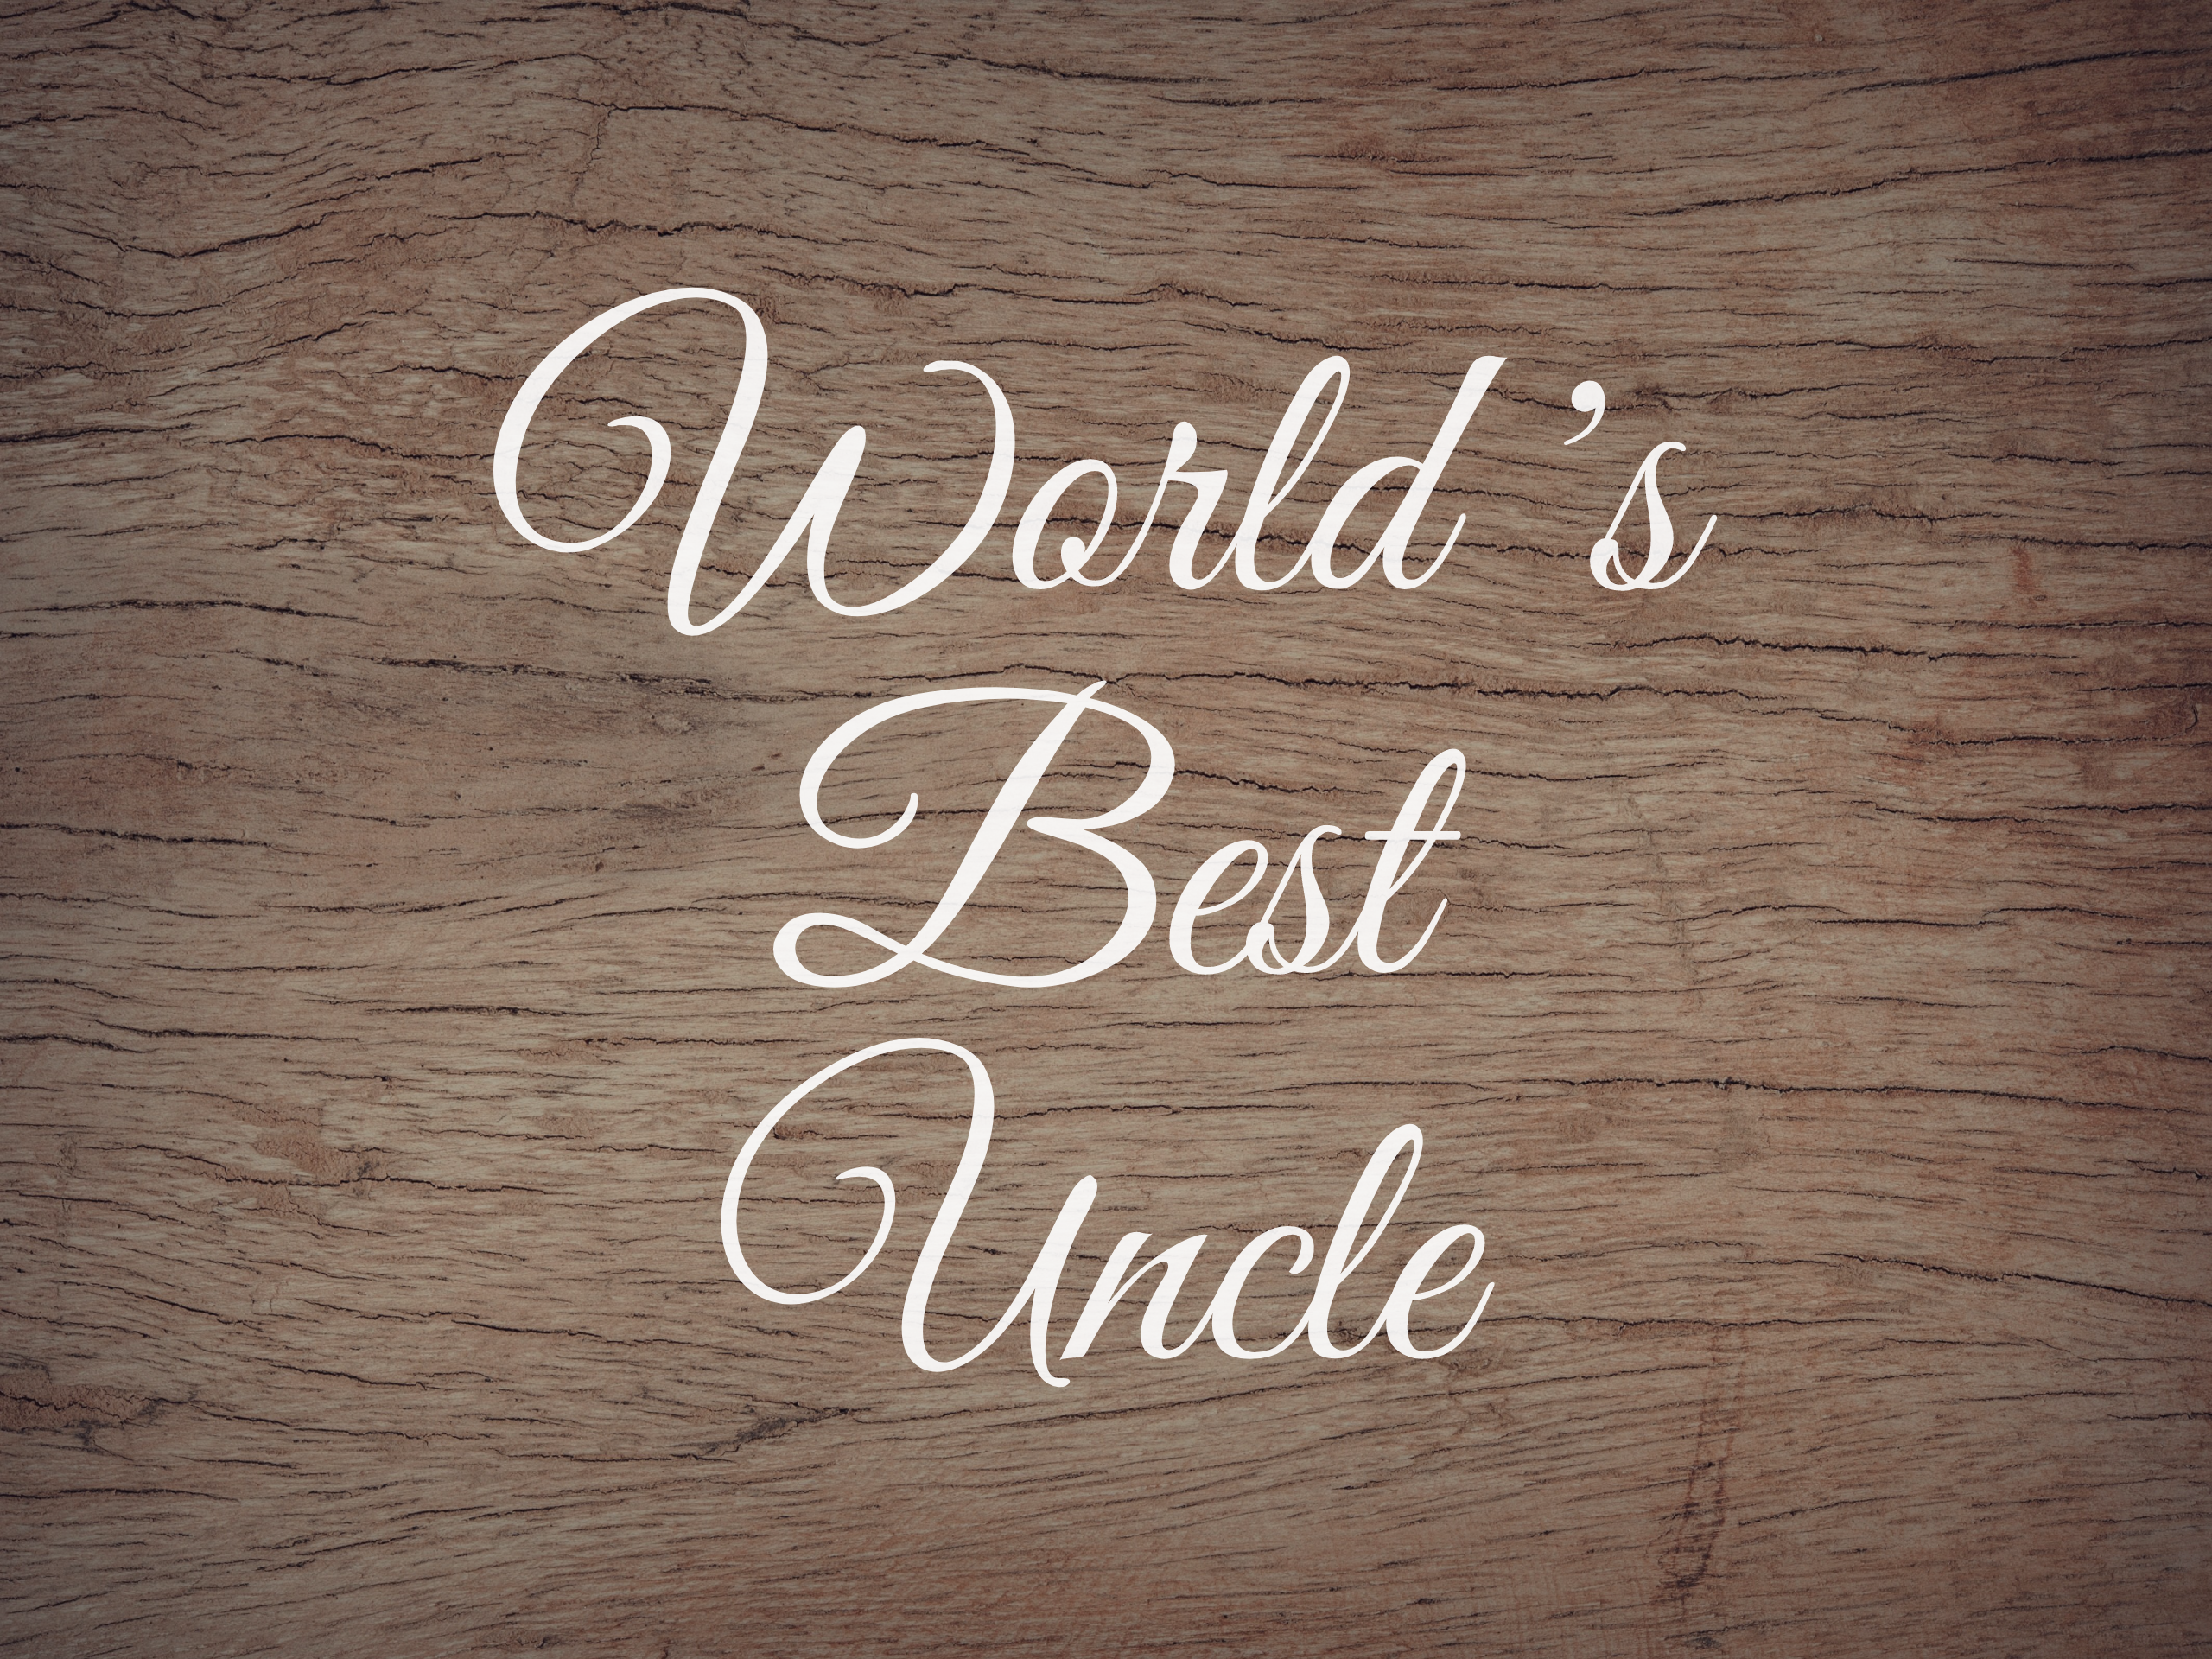 World's Best Uncle Decal - Holiday Uncle/Father/Dad/Dada/Daddy/Brother Vinyl Decals for Home, Gifts, Businesses and More!